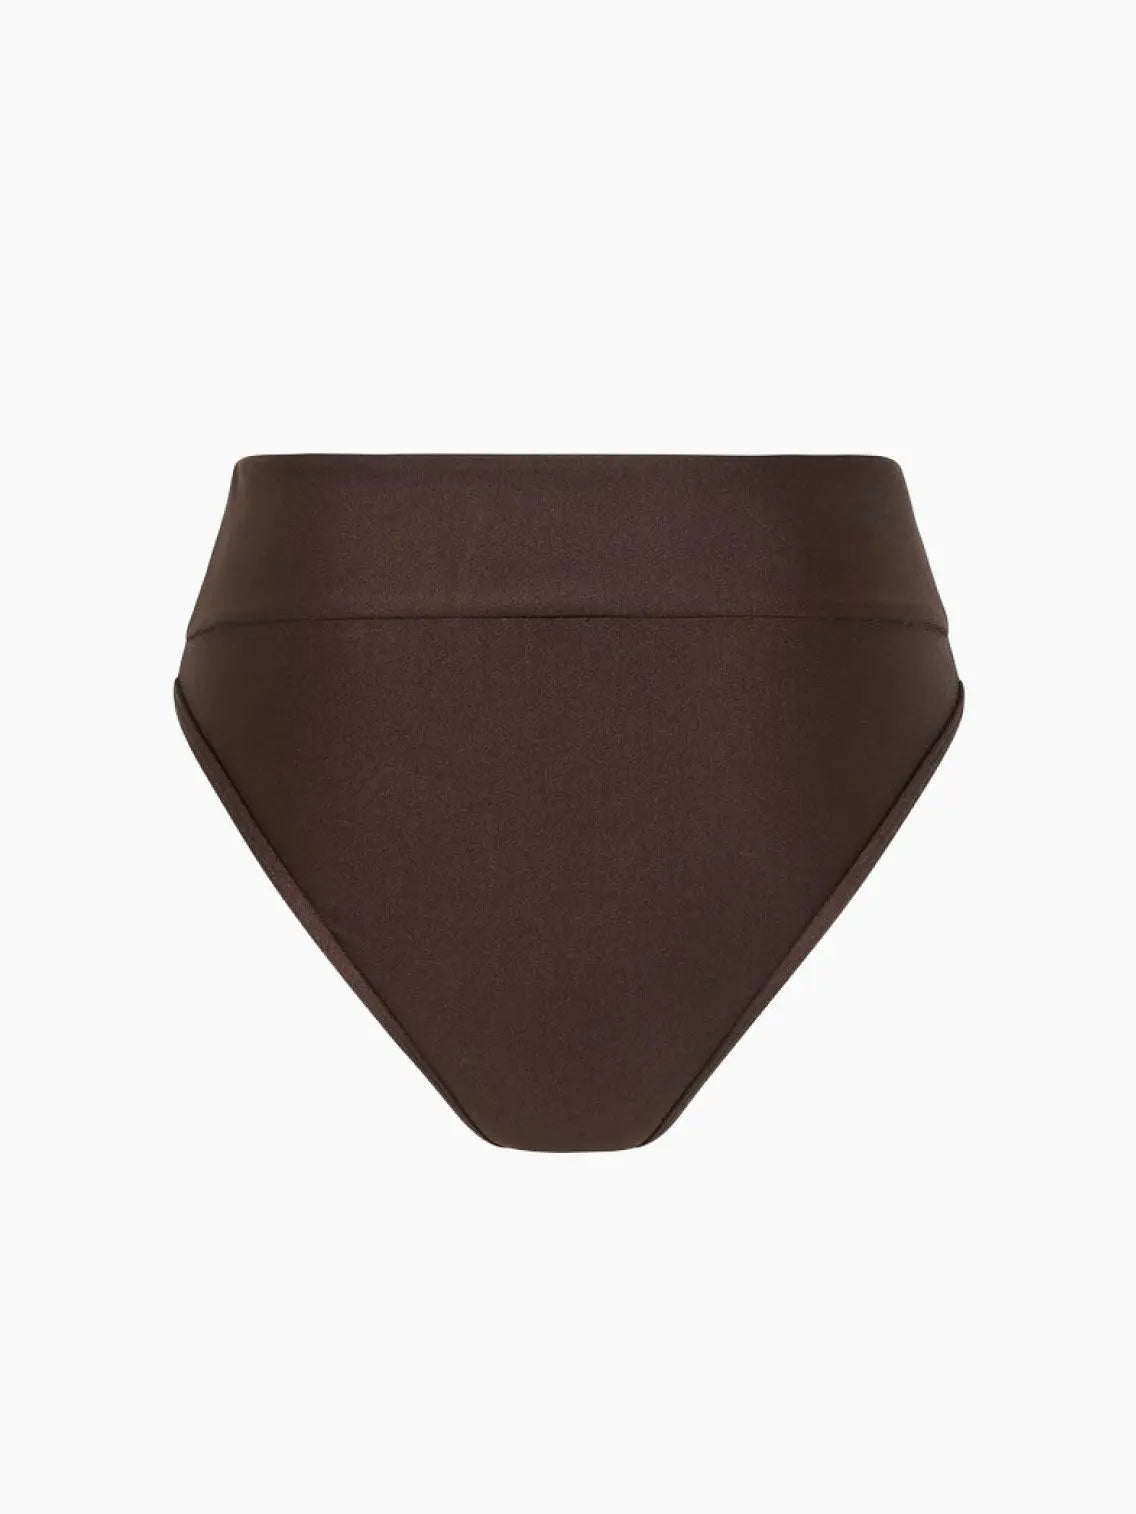 A pair of Chocolate High Waist Brief underwear from Innes Lauren. The fabric appears smooth, and the waistband is wide for added support and comfort. The style is simple and modern, offering full coverage.